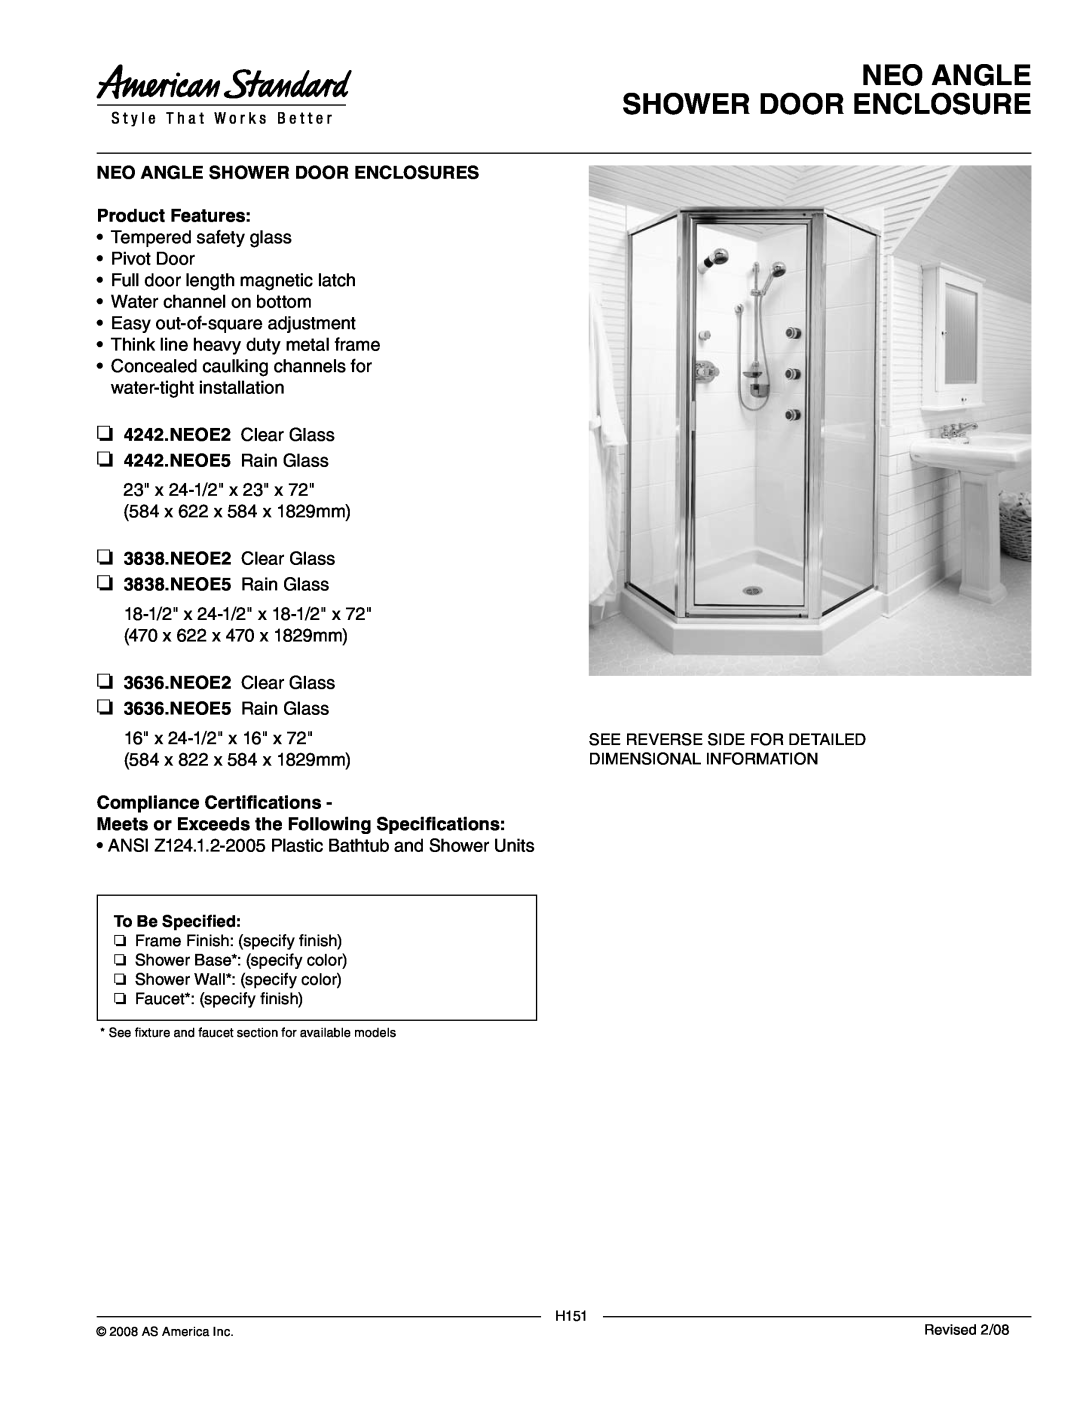 American Standard 3636.NEOE2 manual Neo Angle Shower Door Enclosure, NEO ANGLE SHOWER DOOR ENCLOSURES Product Features 